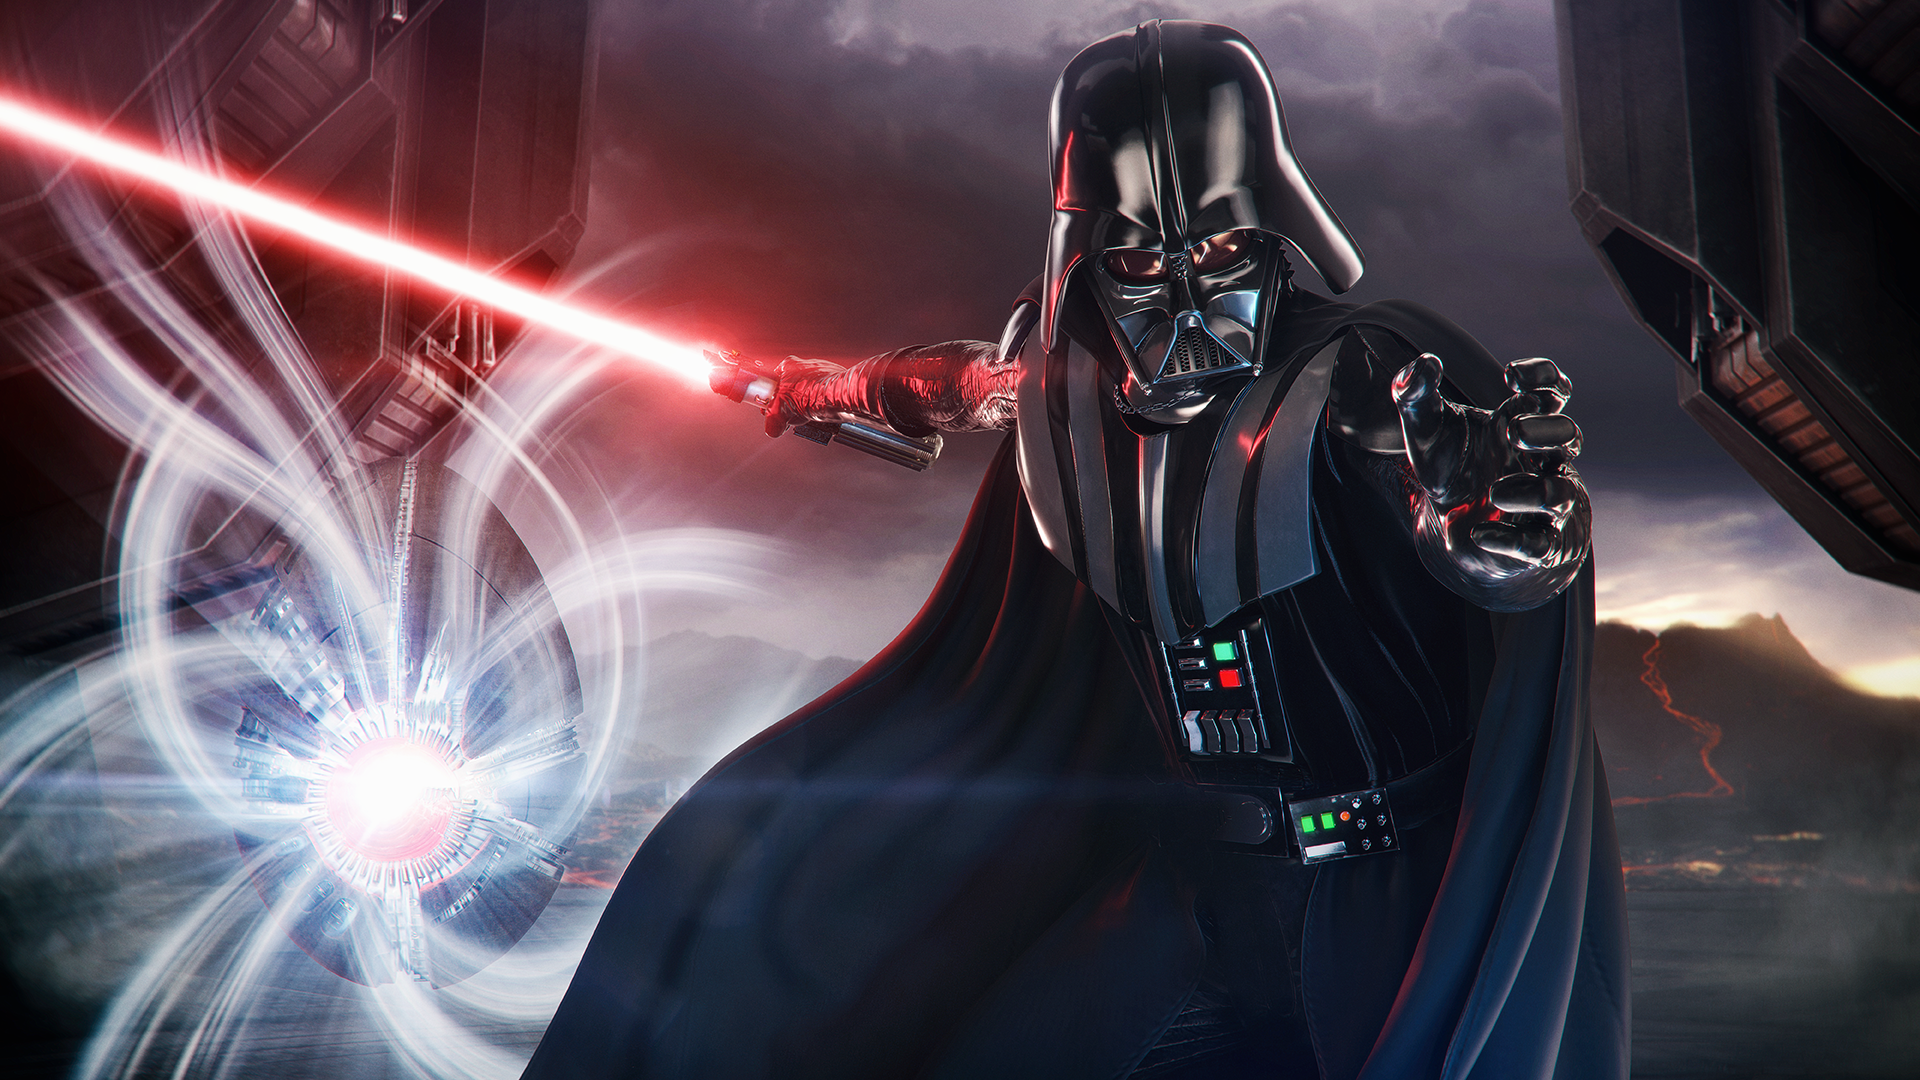 Black Friday and Cyber Monday: Get All Three Episodes of Vader Immortal on Oculus Quest